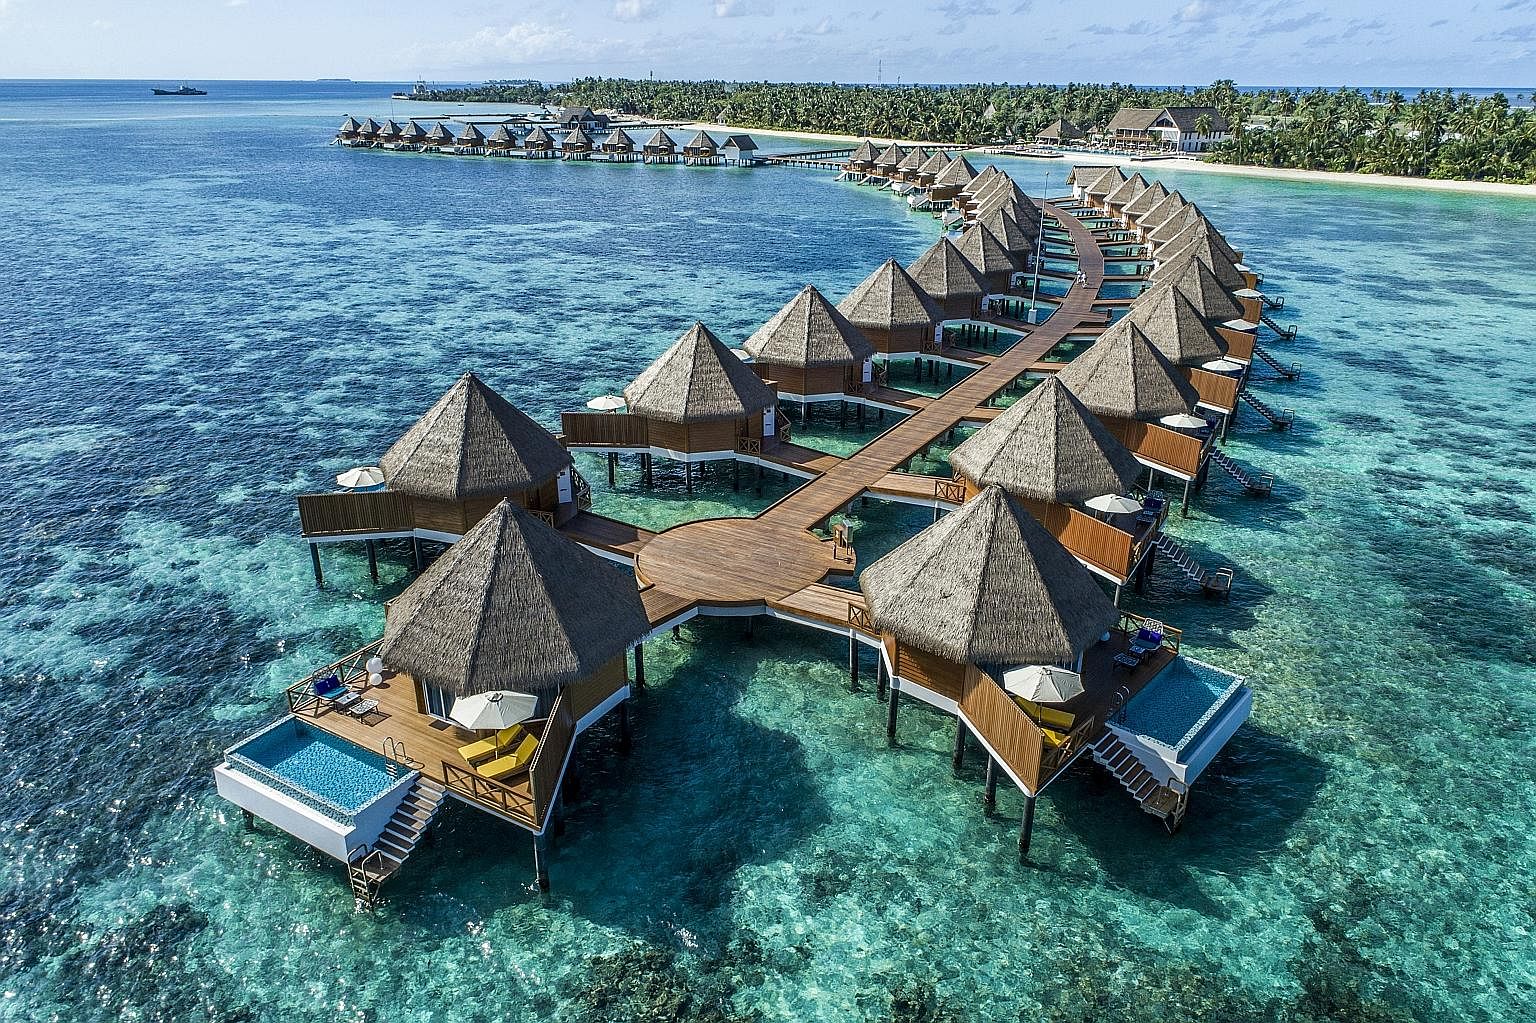 Three resorts run by AccorHotels, including the Mercure Maldives Kooddoo hotel (above), saw some last-minute cancellations.